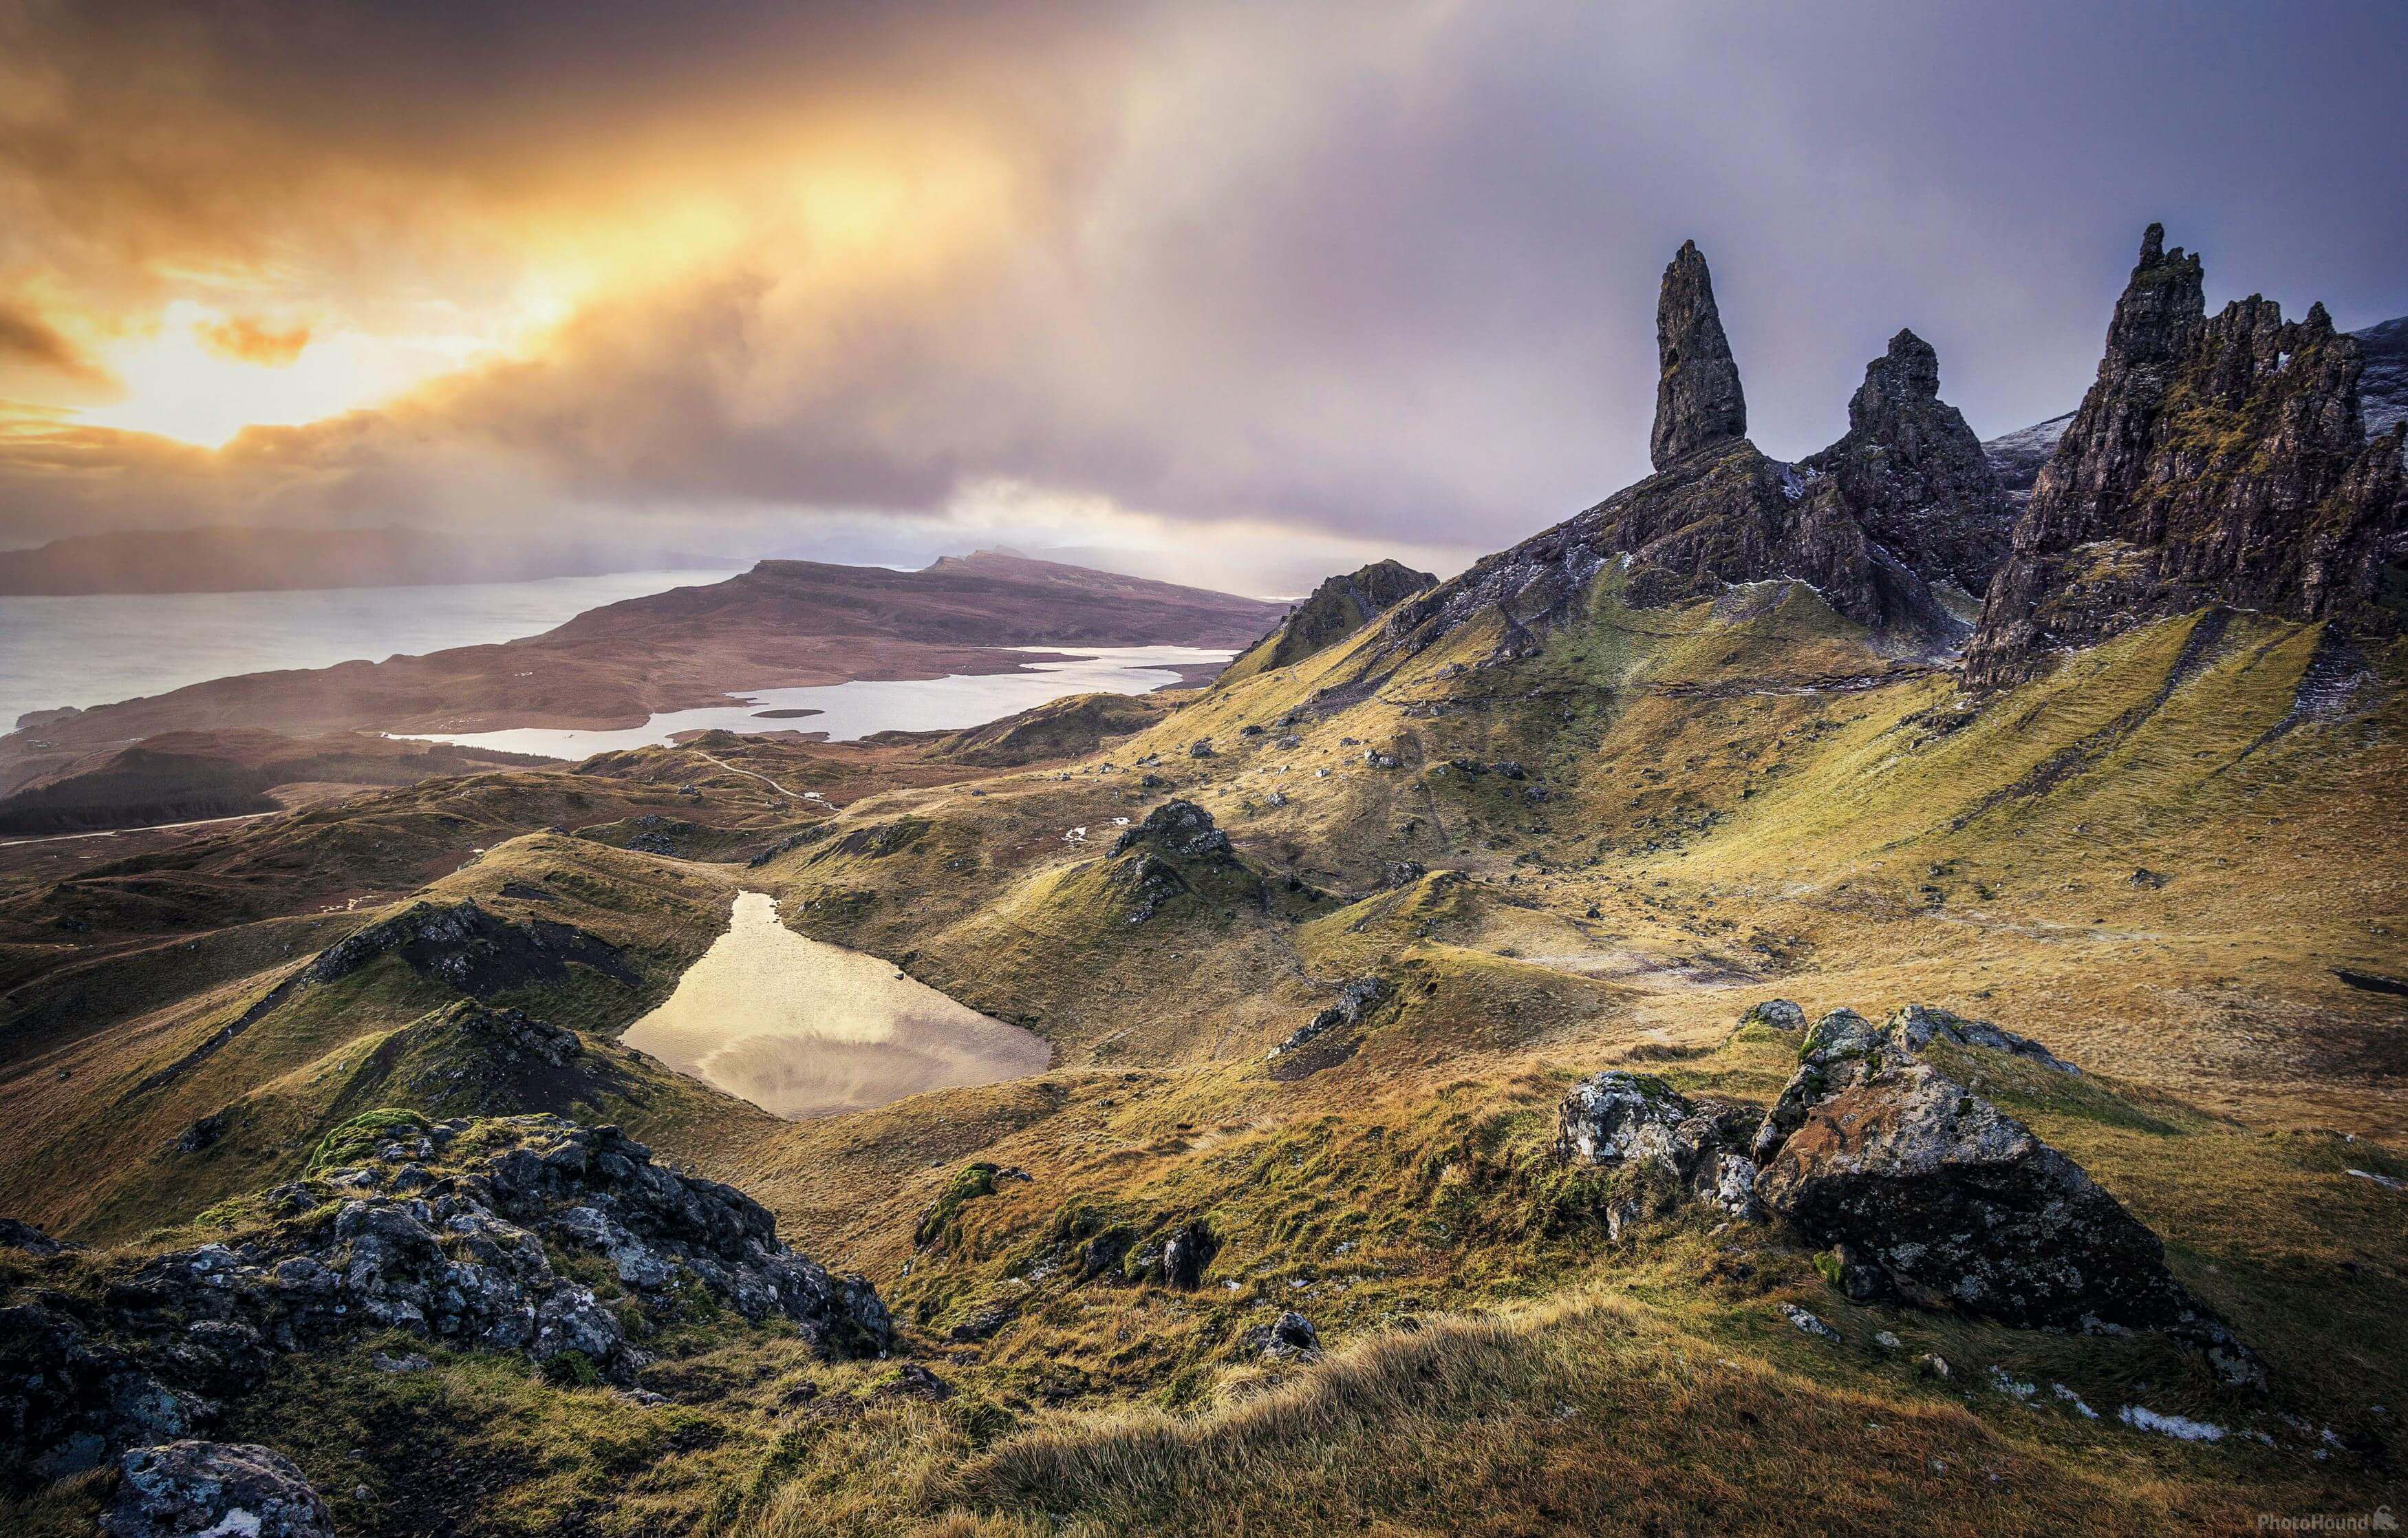 Image of The Old Man of Storr by Robin Koehler